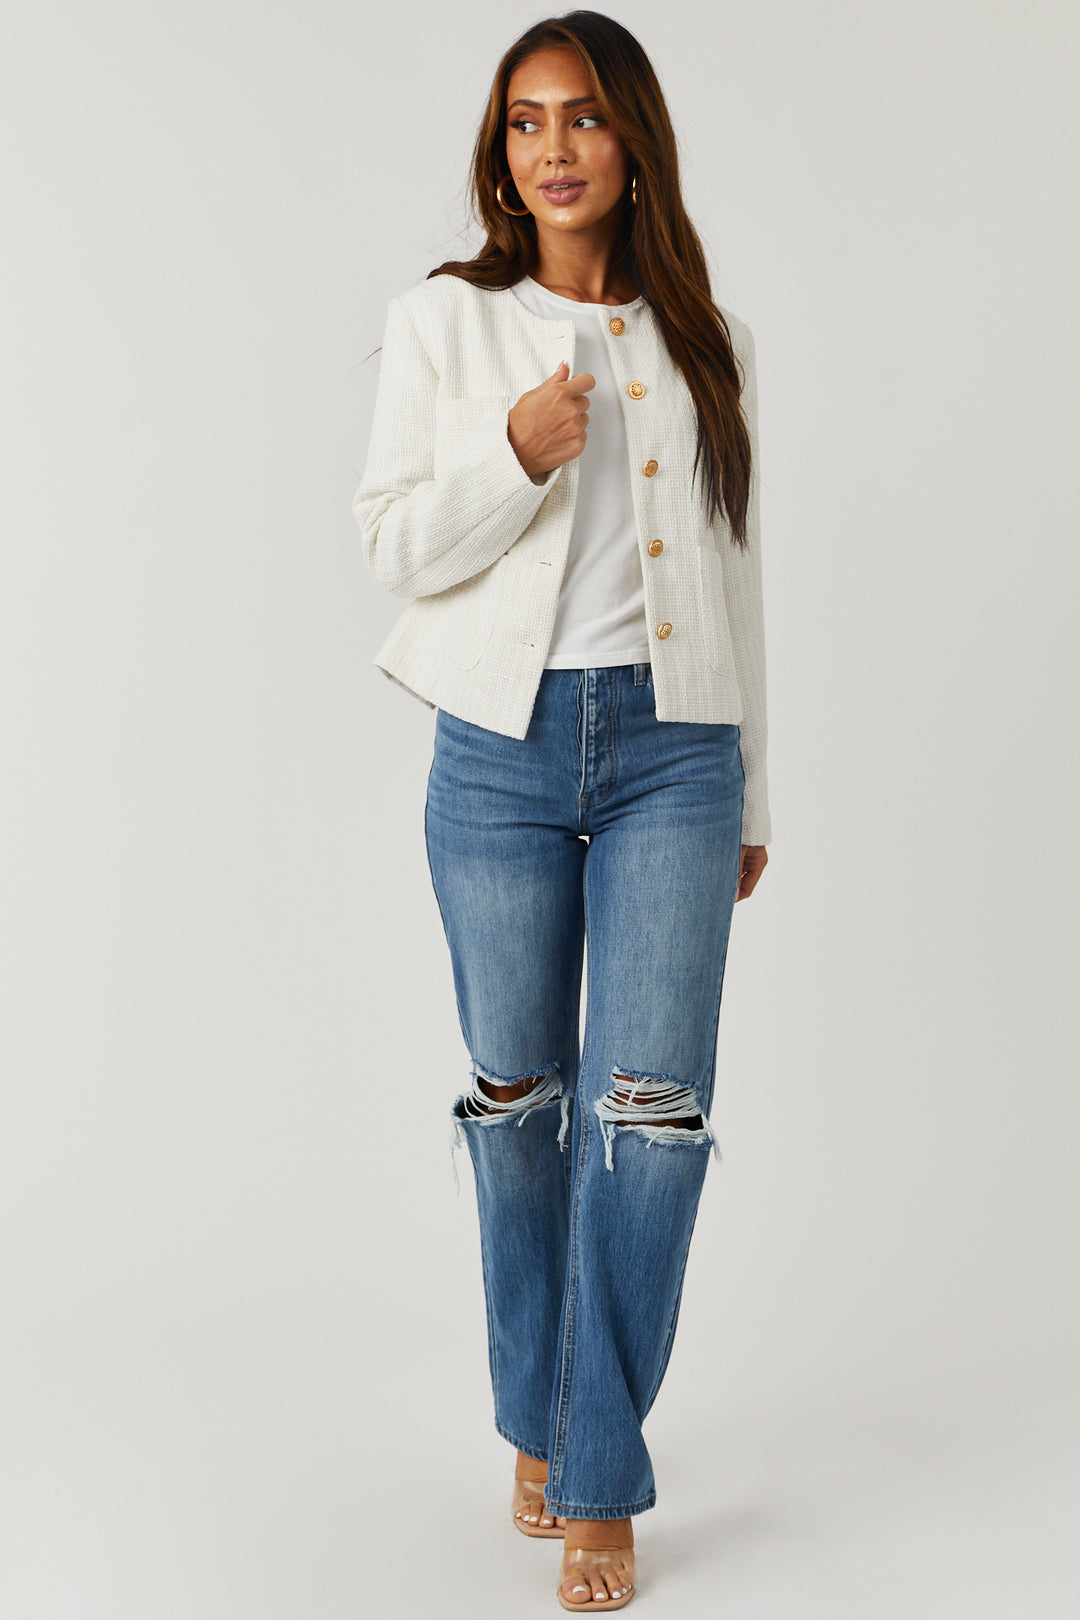 Tweed and White- Tweed Jacket- White Jeans- White Jeans with